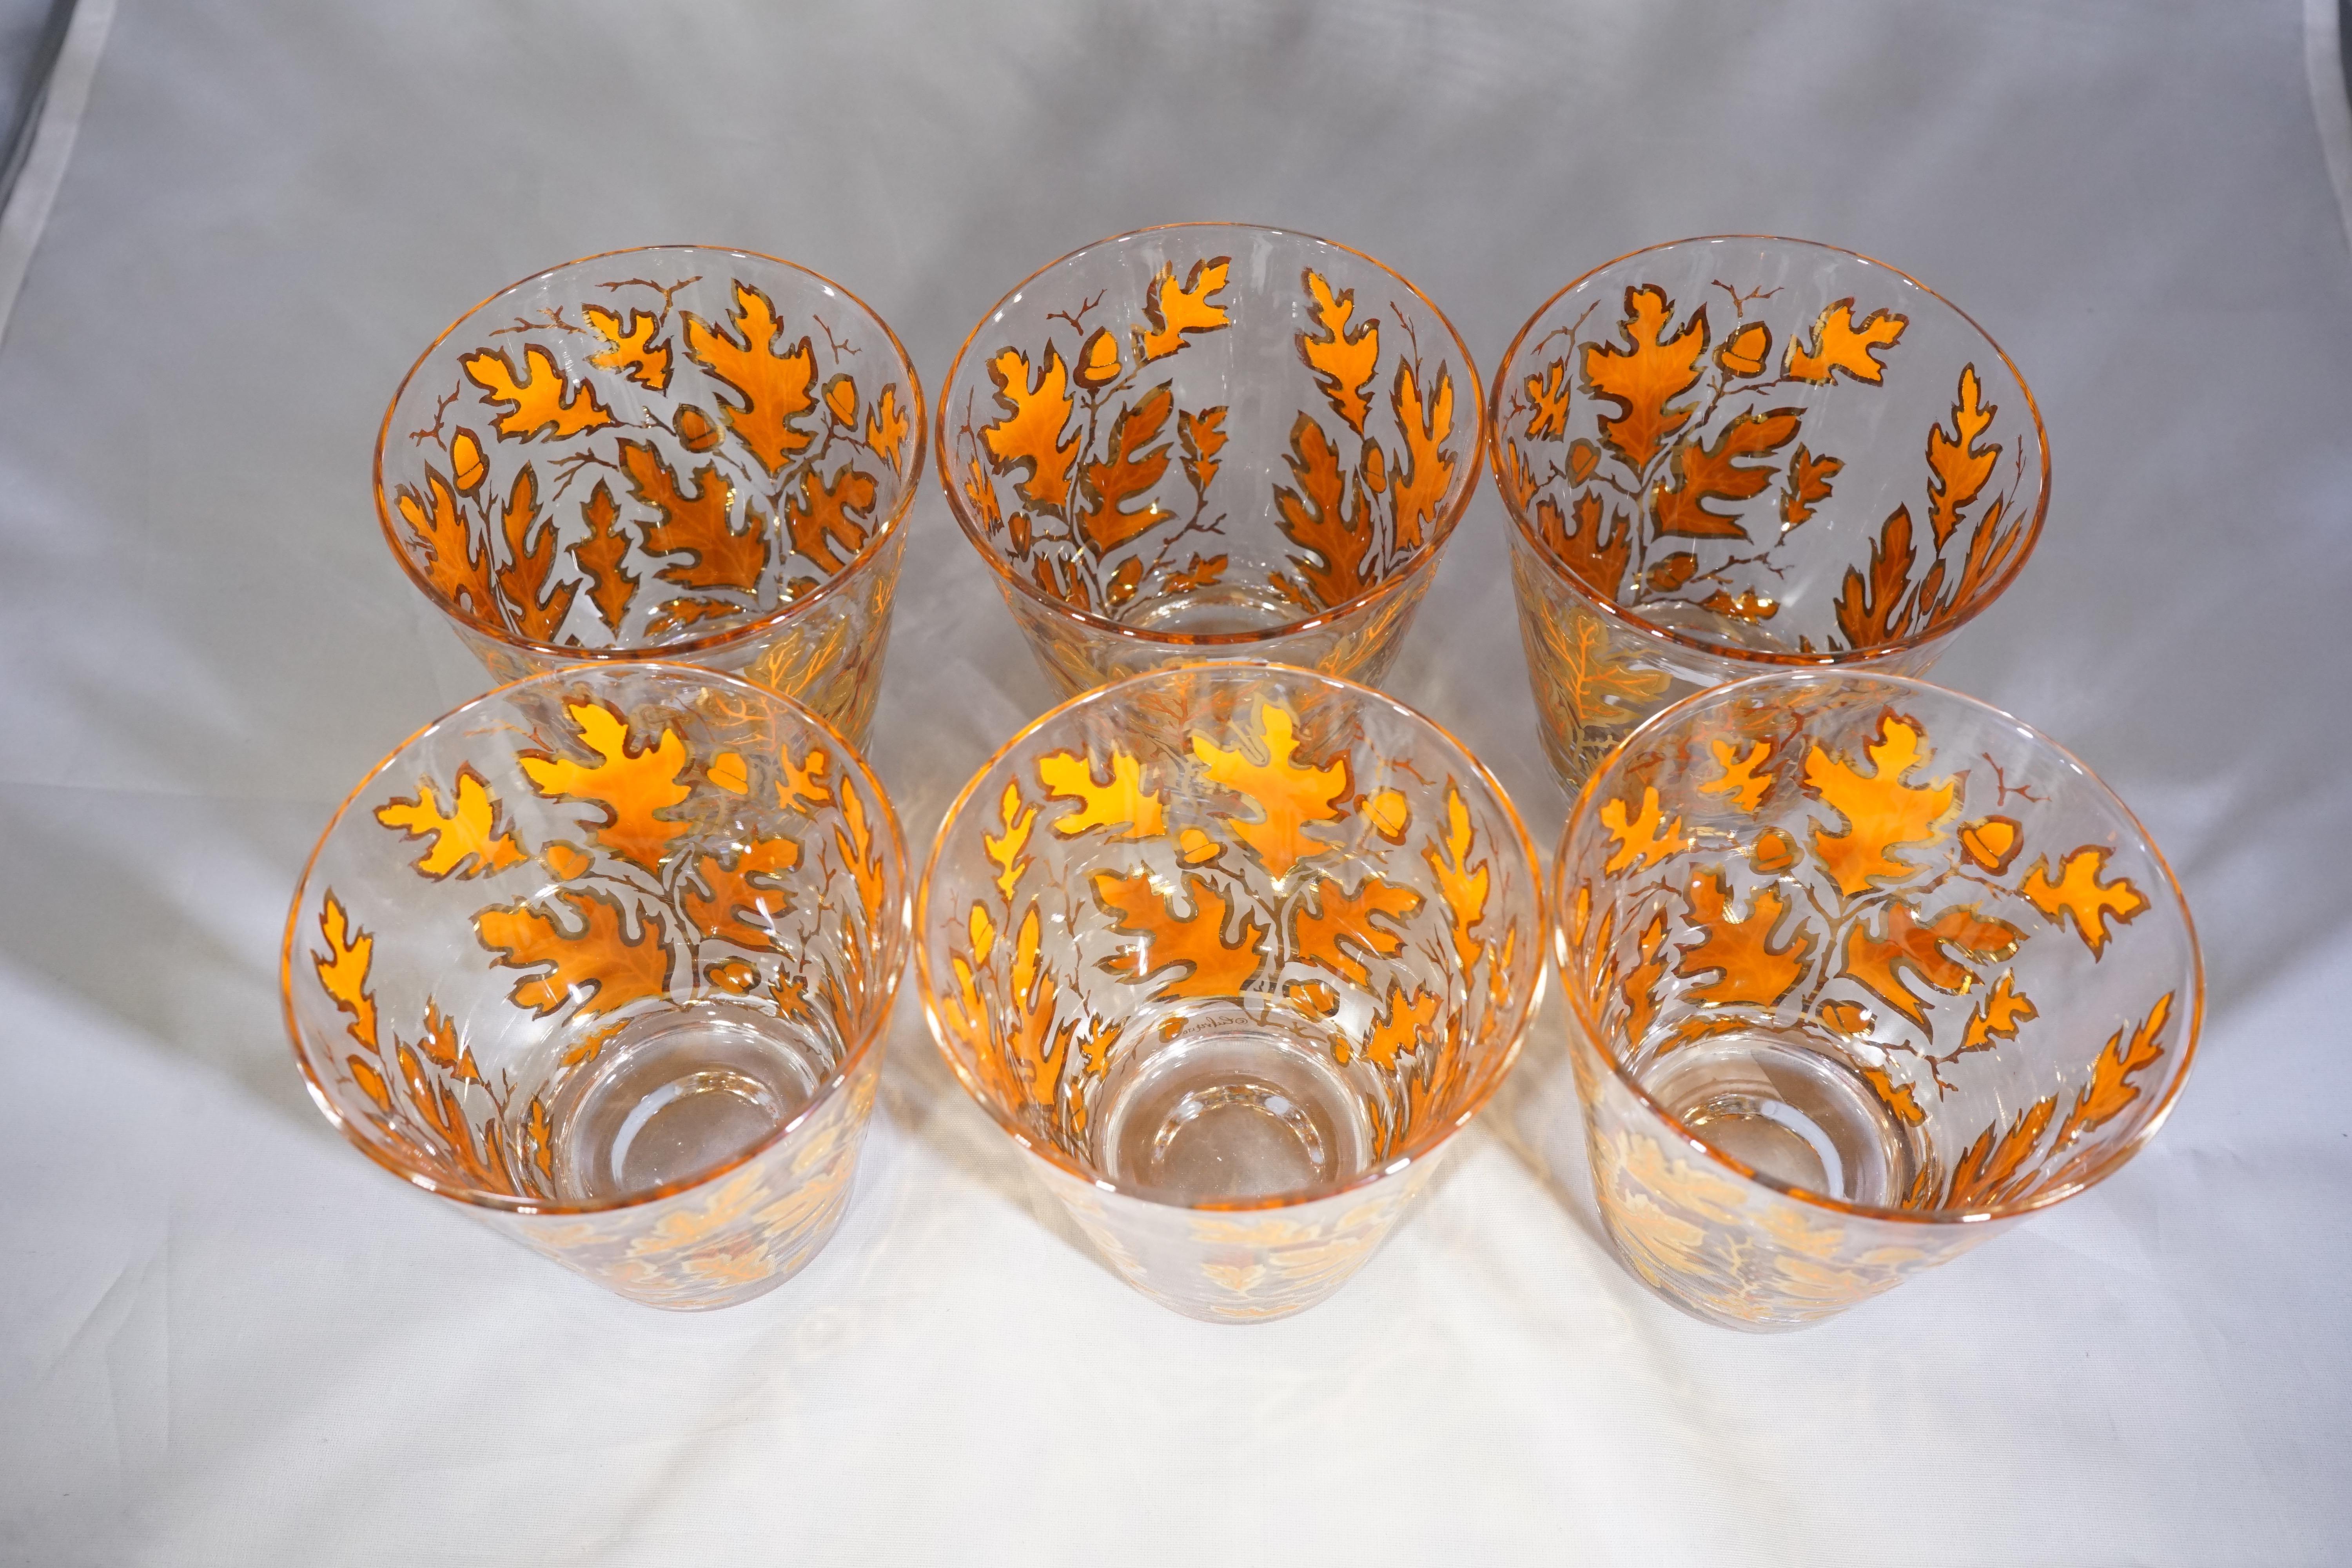 Midcentury American 6-Piece Autumn Leaves Glassware Set by Culver 1